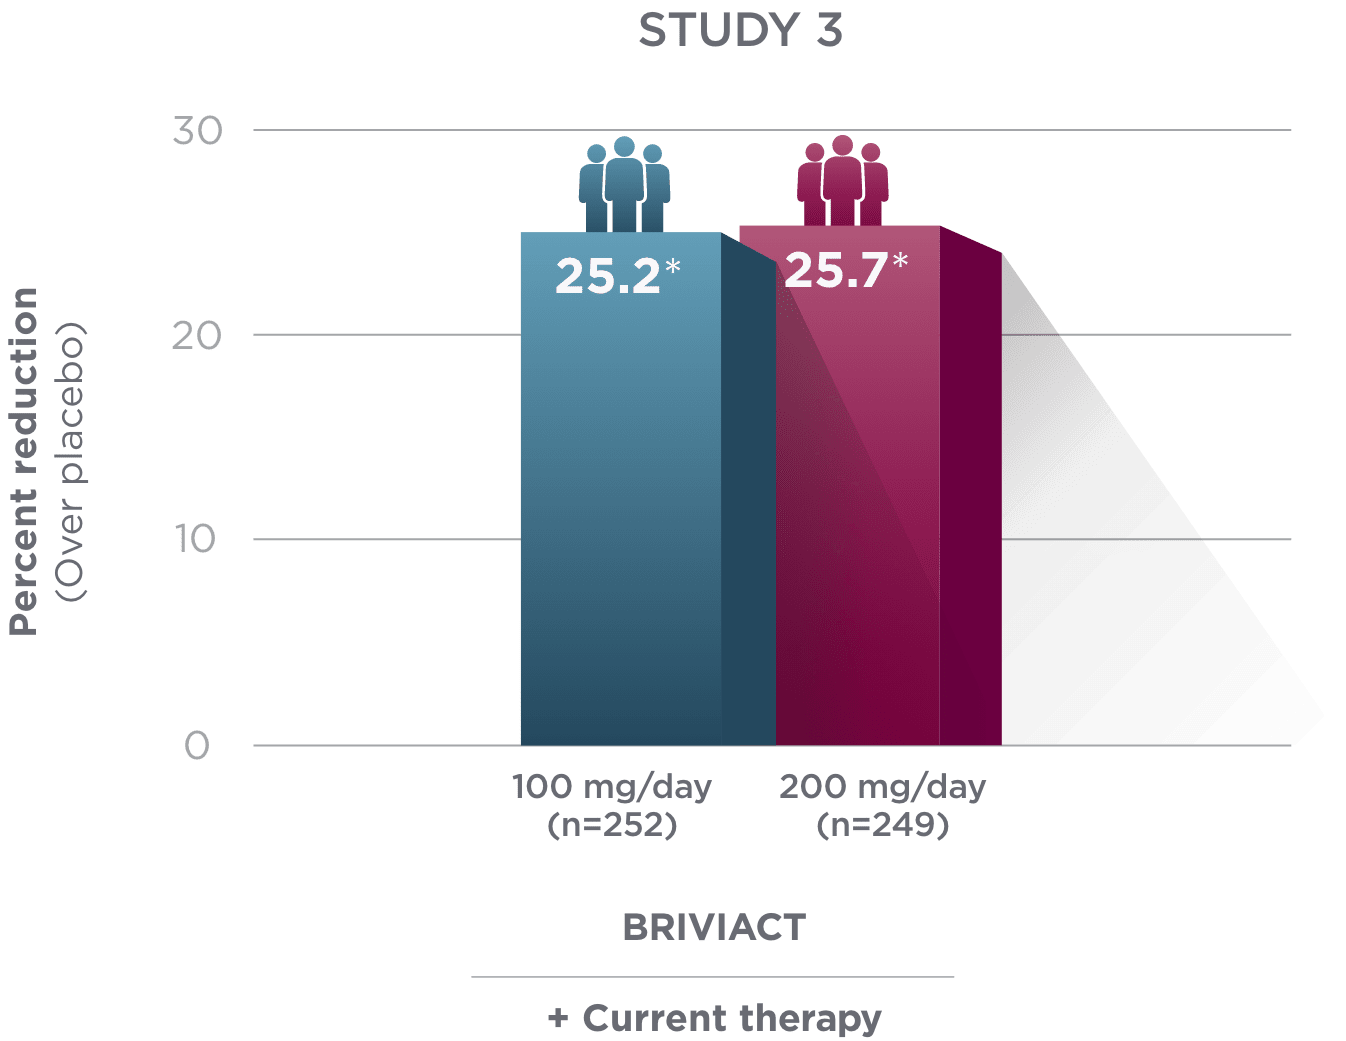 BRIVIACT® + current therapy, percentage reduction in focal seizure frequency graph